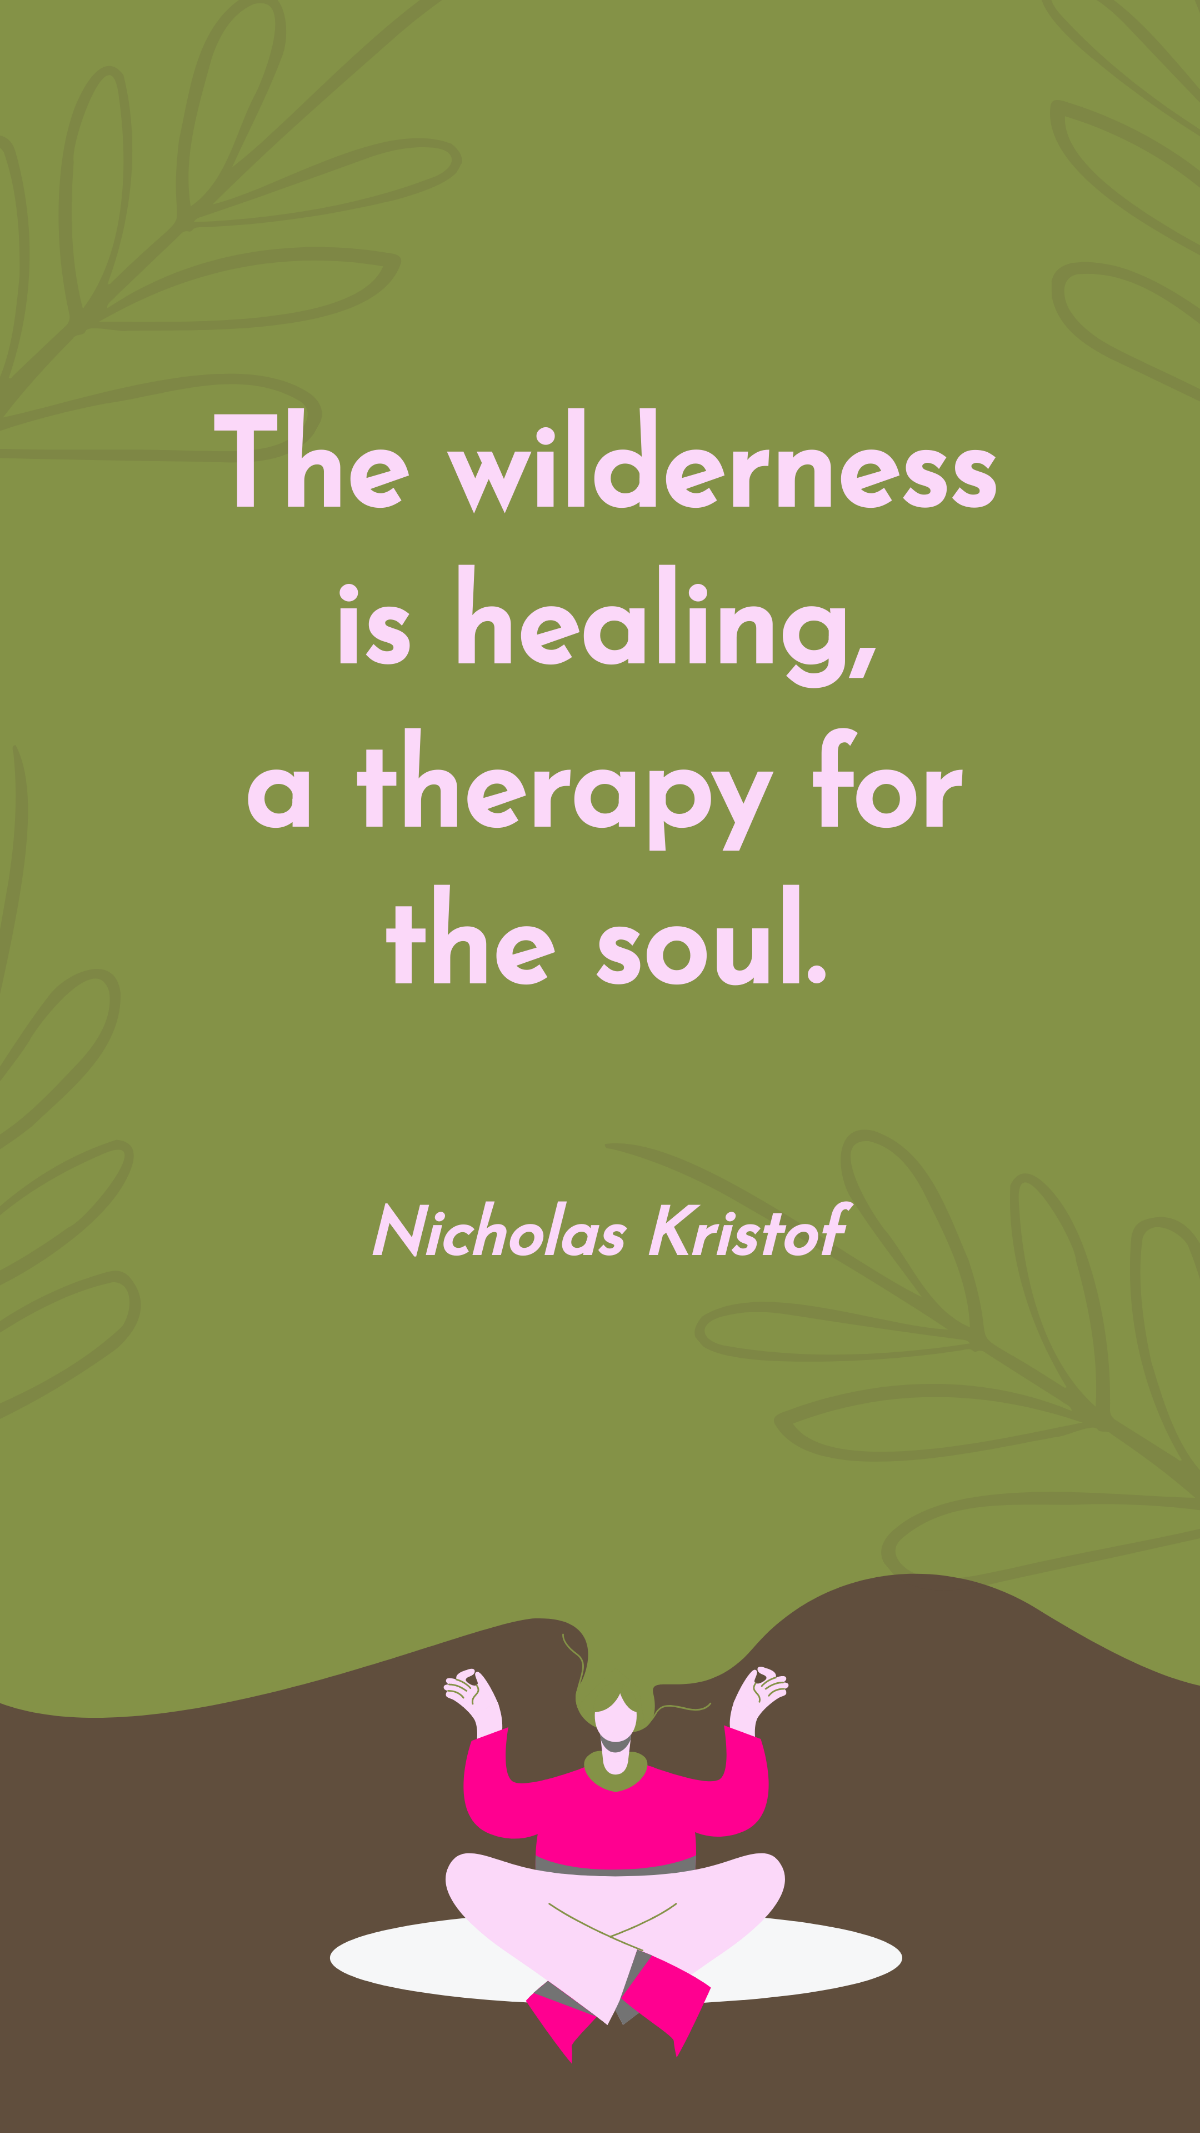 Free Nicholas Kristof - The wilderness is healing, a therapy for the soul. Template